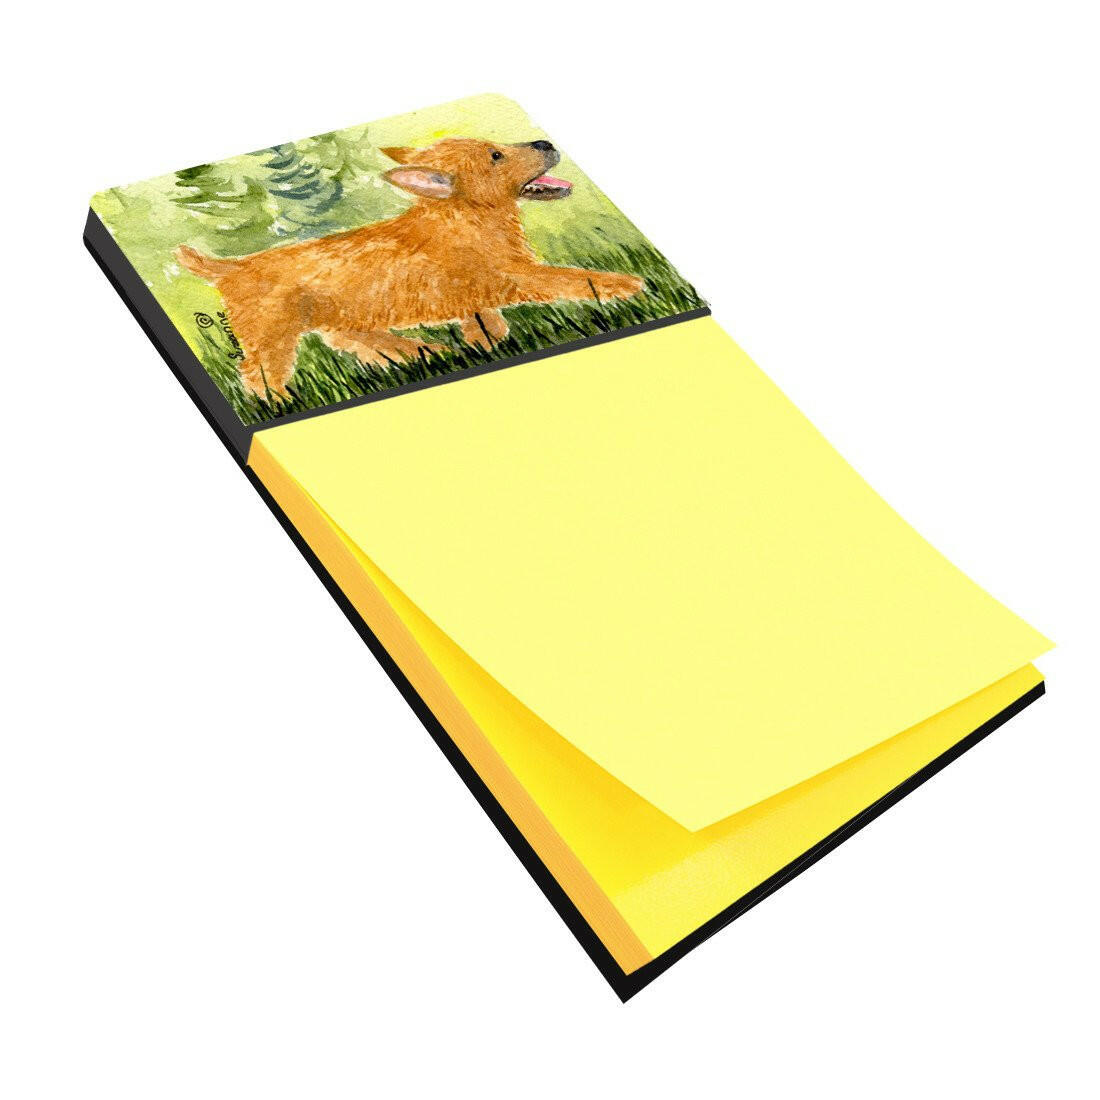 Norwich Terrier Refiillable Sticky Note Holder or Postit Note Dispenser SS8884SN by Caroline's Treasures